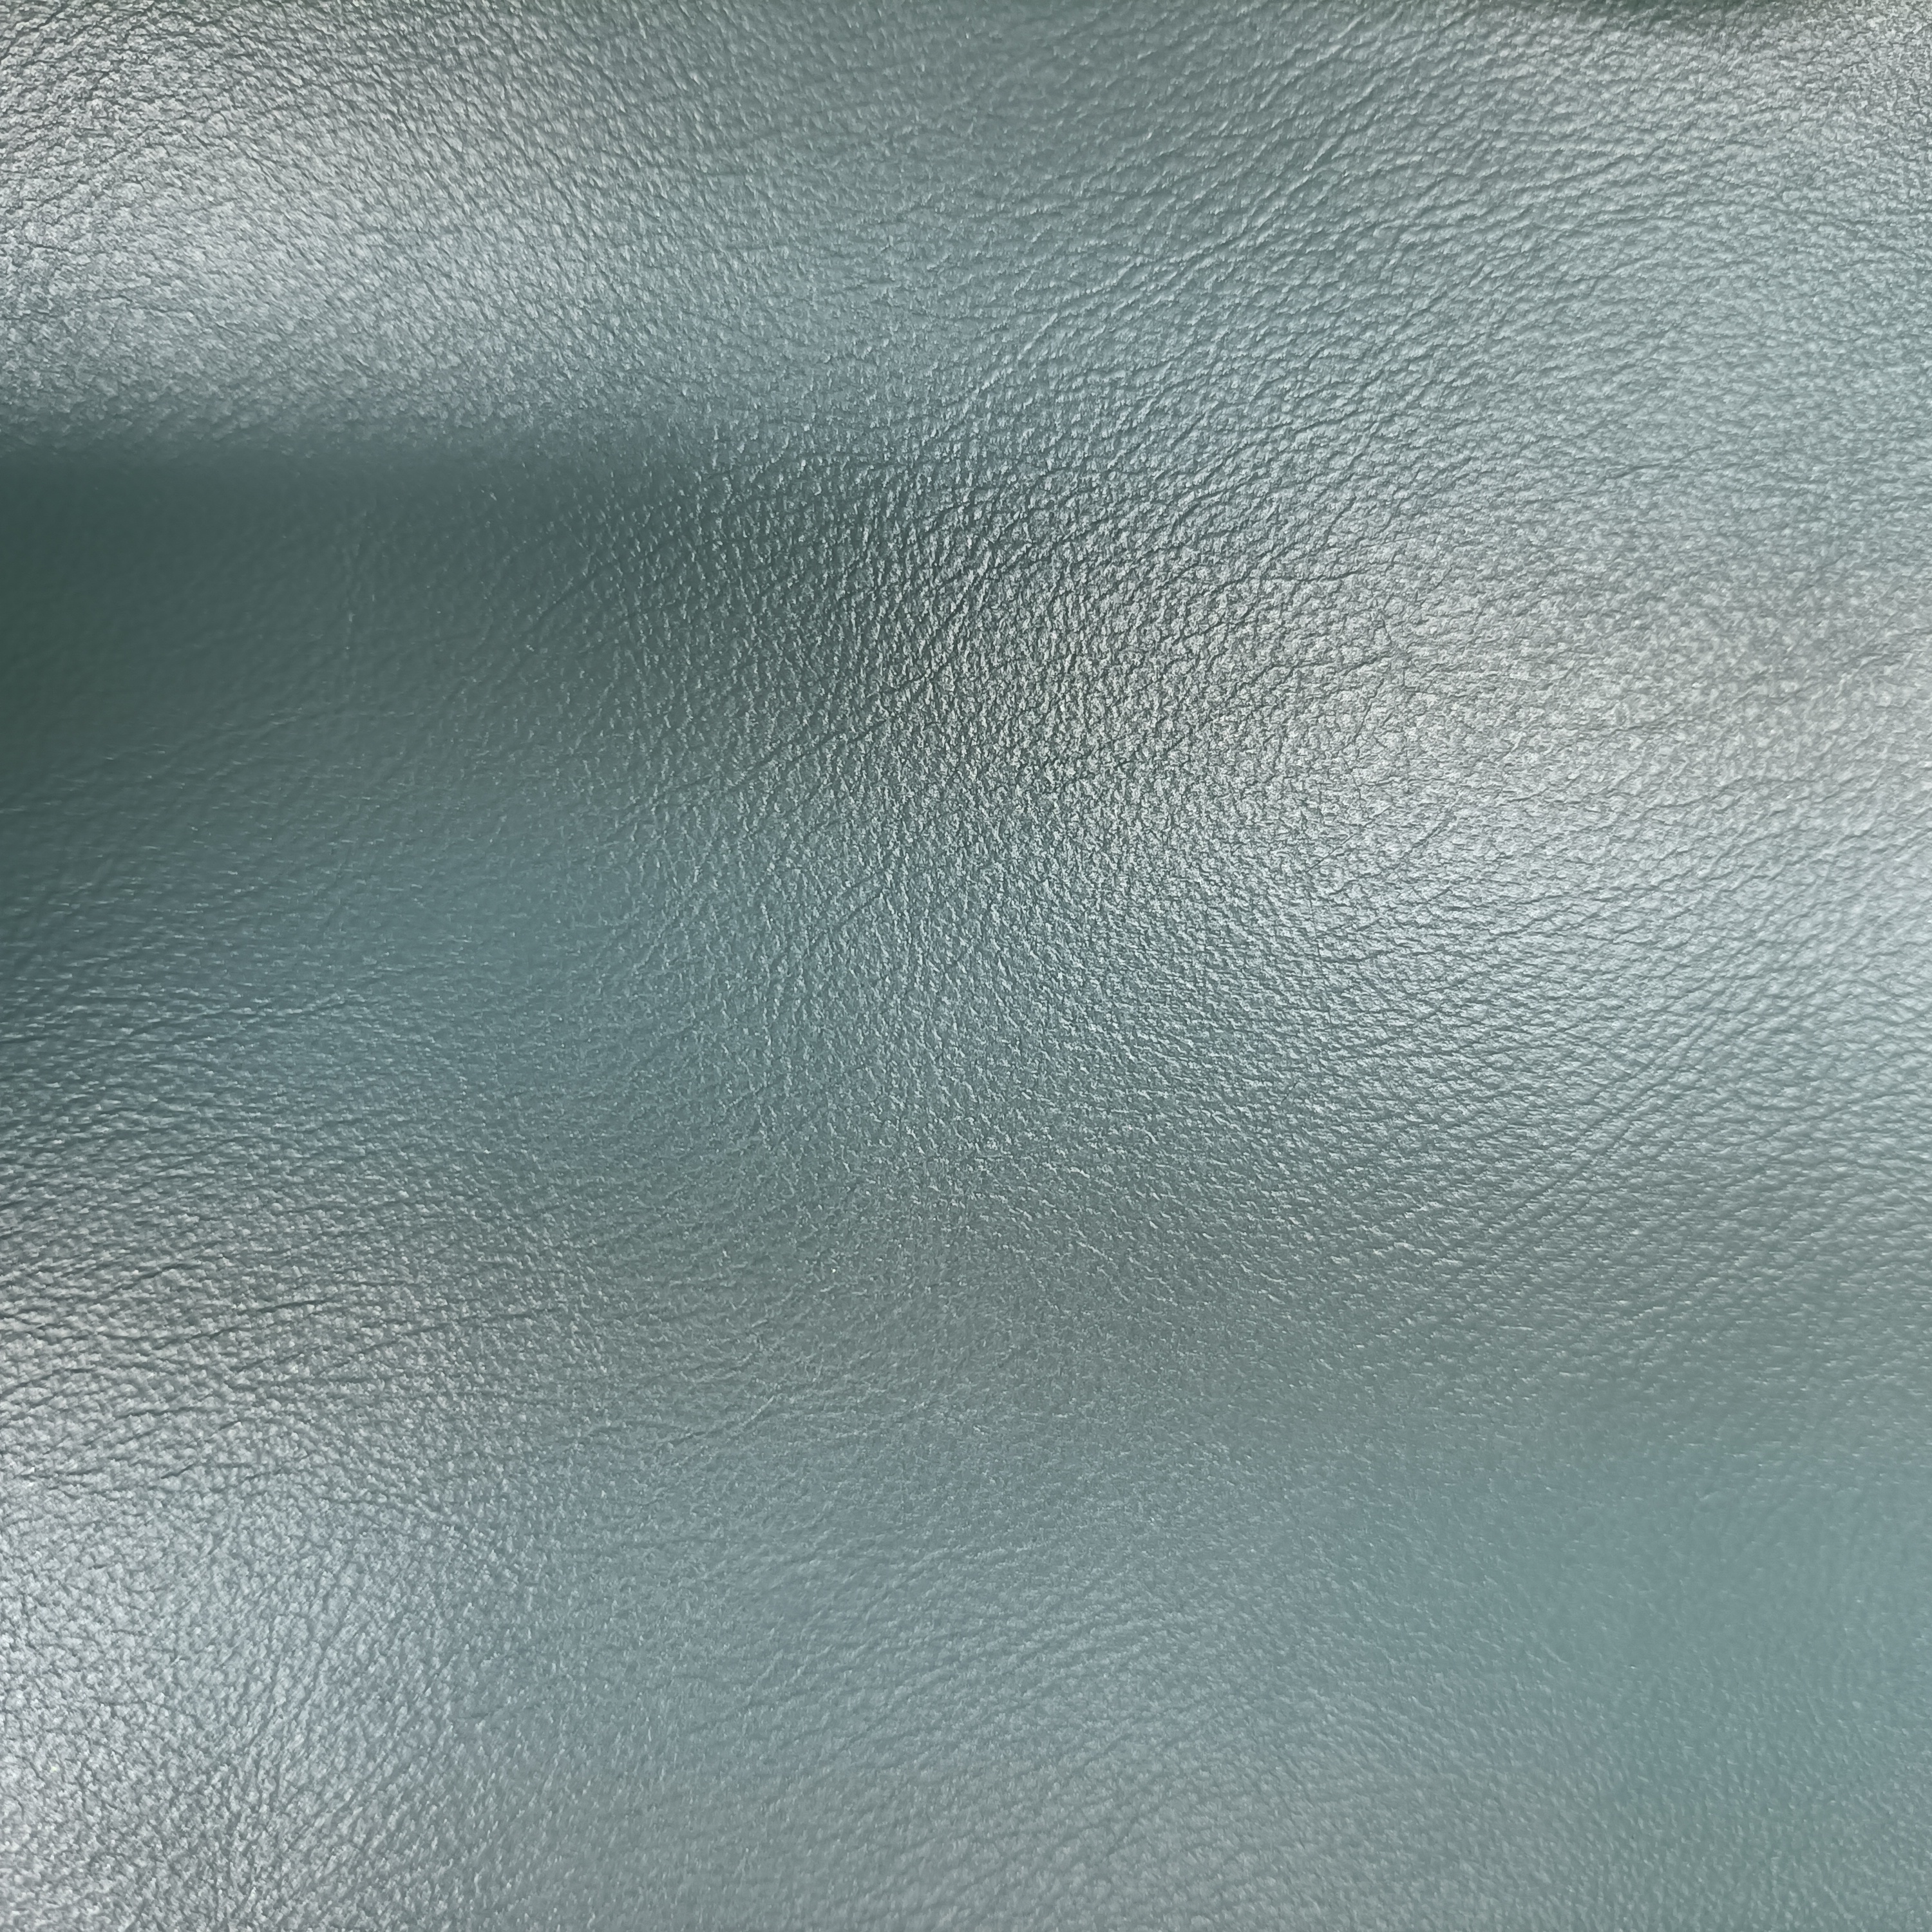 China good Price Highest Quality Water-Based Pearly-Shine Pu Leather For Fashionable Bags Sofa Car Interior Design